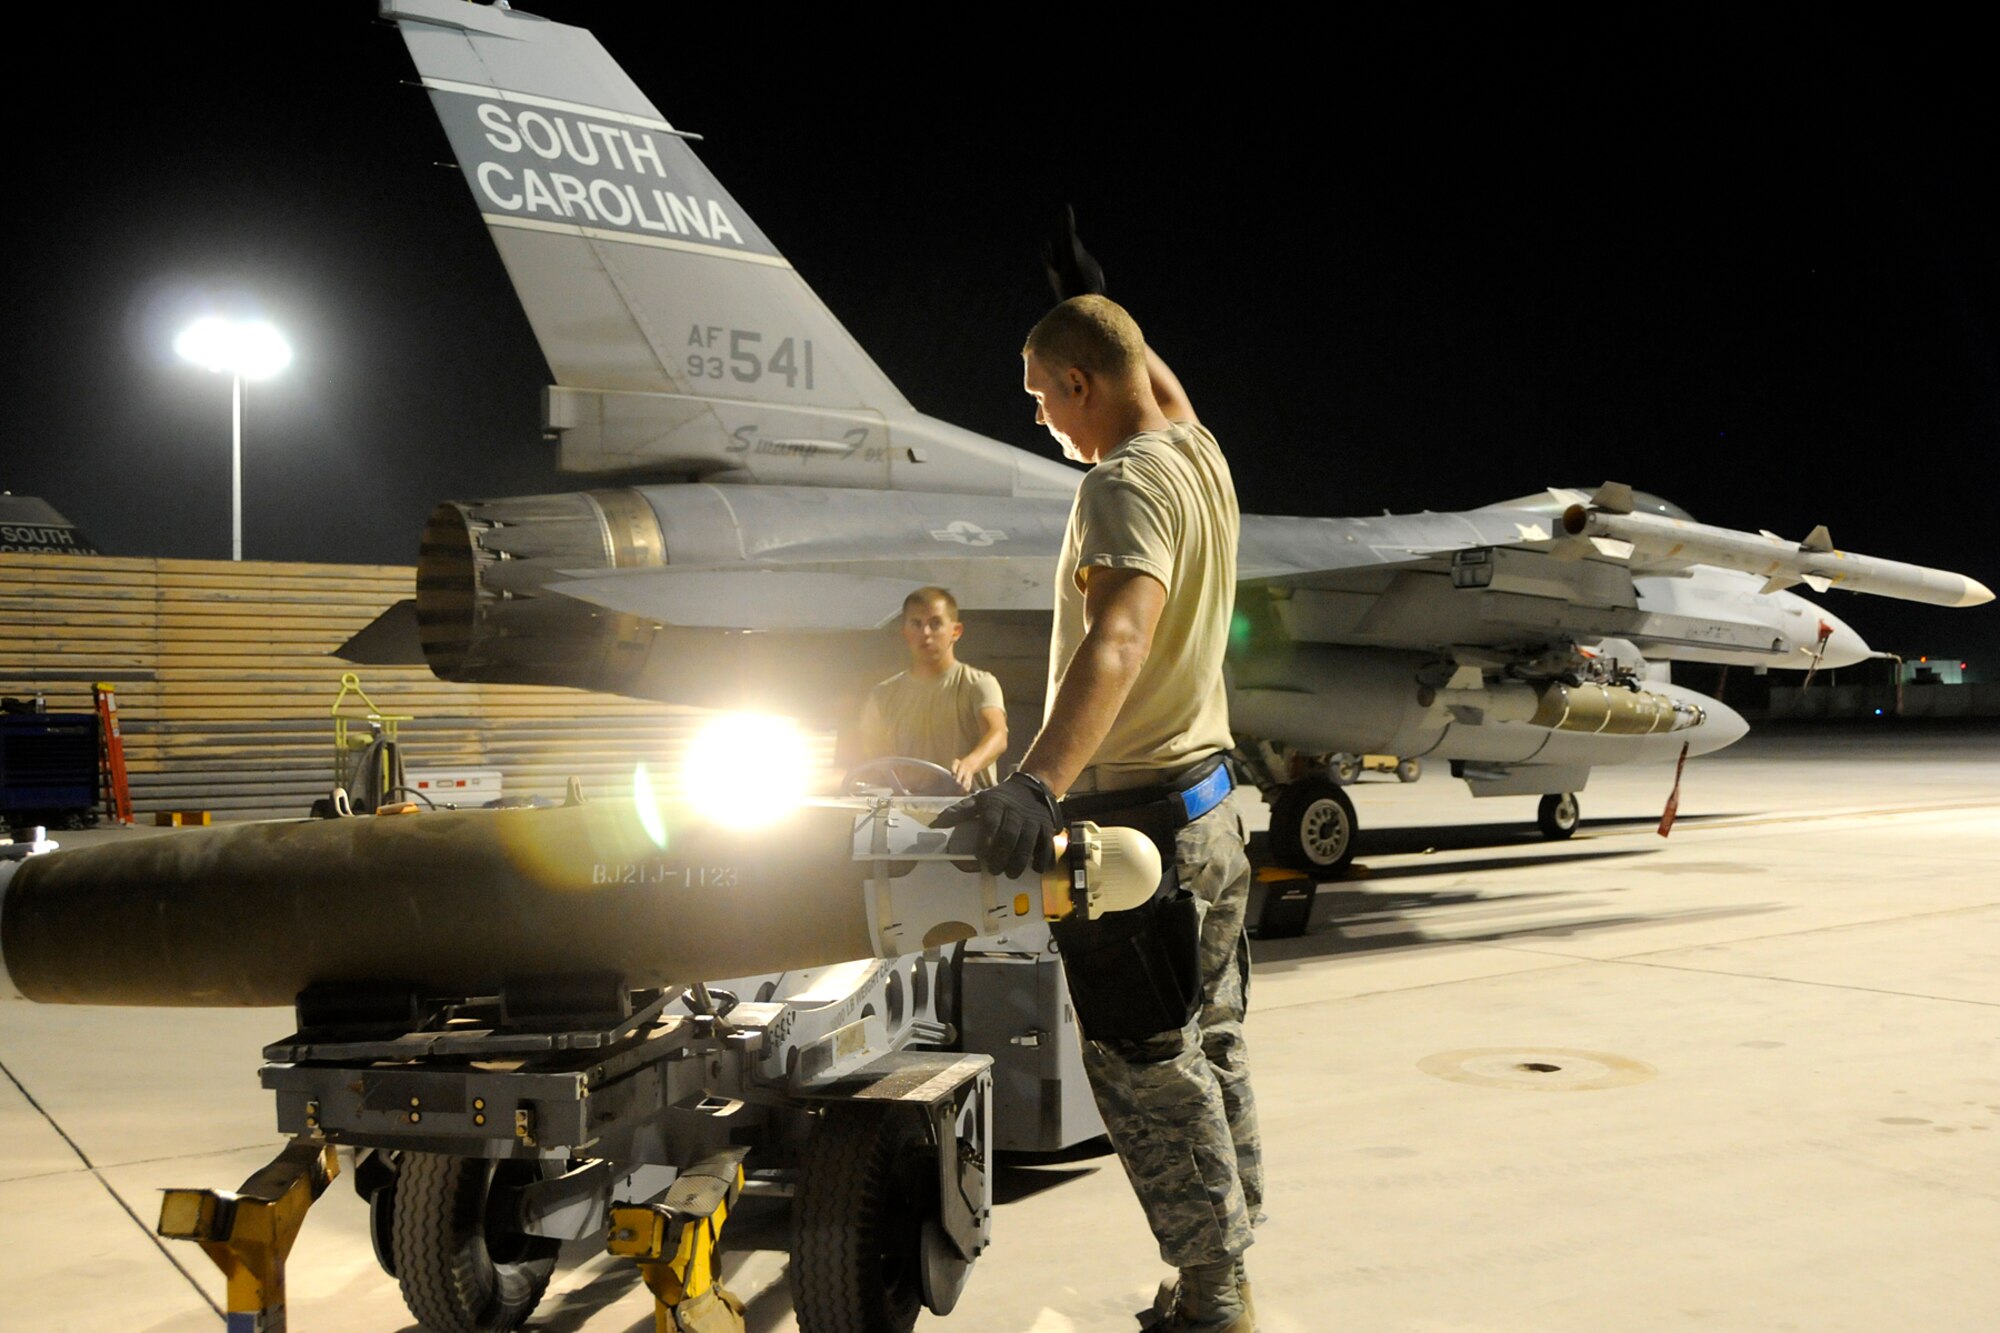 Staff Sgt. Michael Stockslager, a weapons loader with the 451st Expeditionary Aircraft Maintenance Squadron, guides Senior Airman Doug Meadows on a jammer while they load munitions on an F-16 on July 3, 2012. Members of the 169th Fighter Wing at McEntire Joint National Guard Base, S.C., are deployed to KAF in support of Operation Enduring Freedom. Swamp Fox F-16's, pilots, and support personnel began their Air Expeditionary Force deployment early April to take over flying missions for the air tasking order and provide close air support for troops on the ground in Afghanistan. (U.S. Air Force photo/Tech. Sgt. Stephen Hudson)